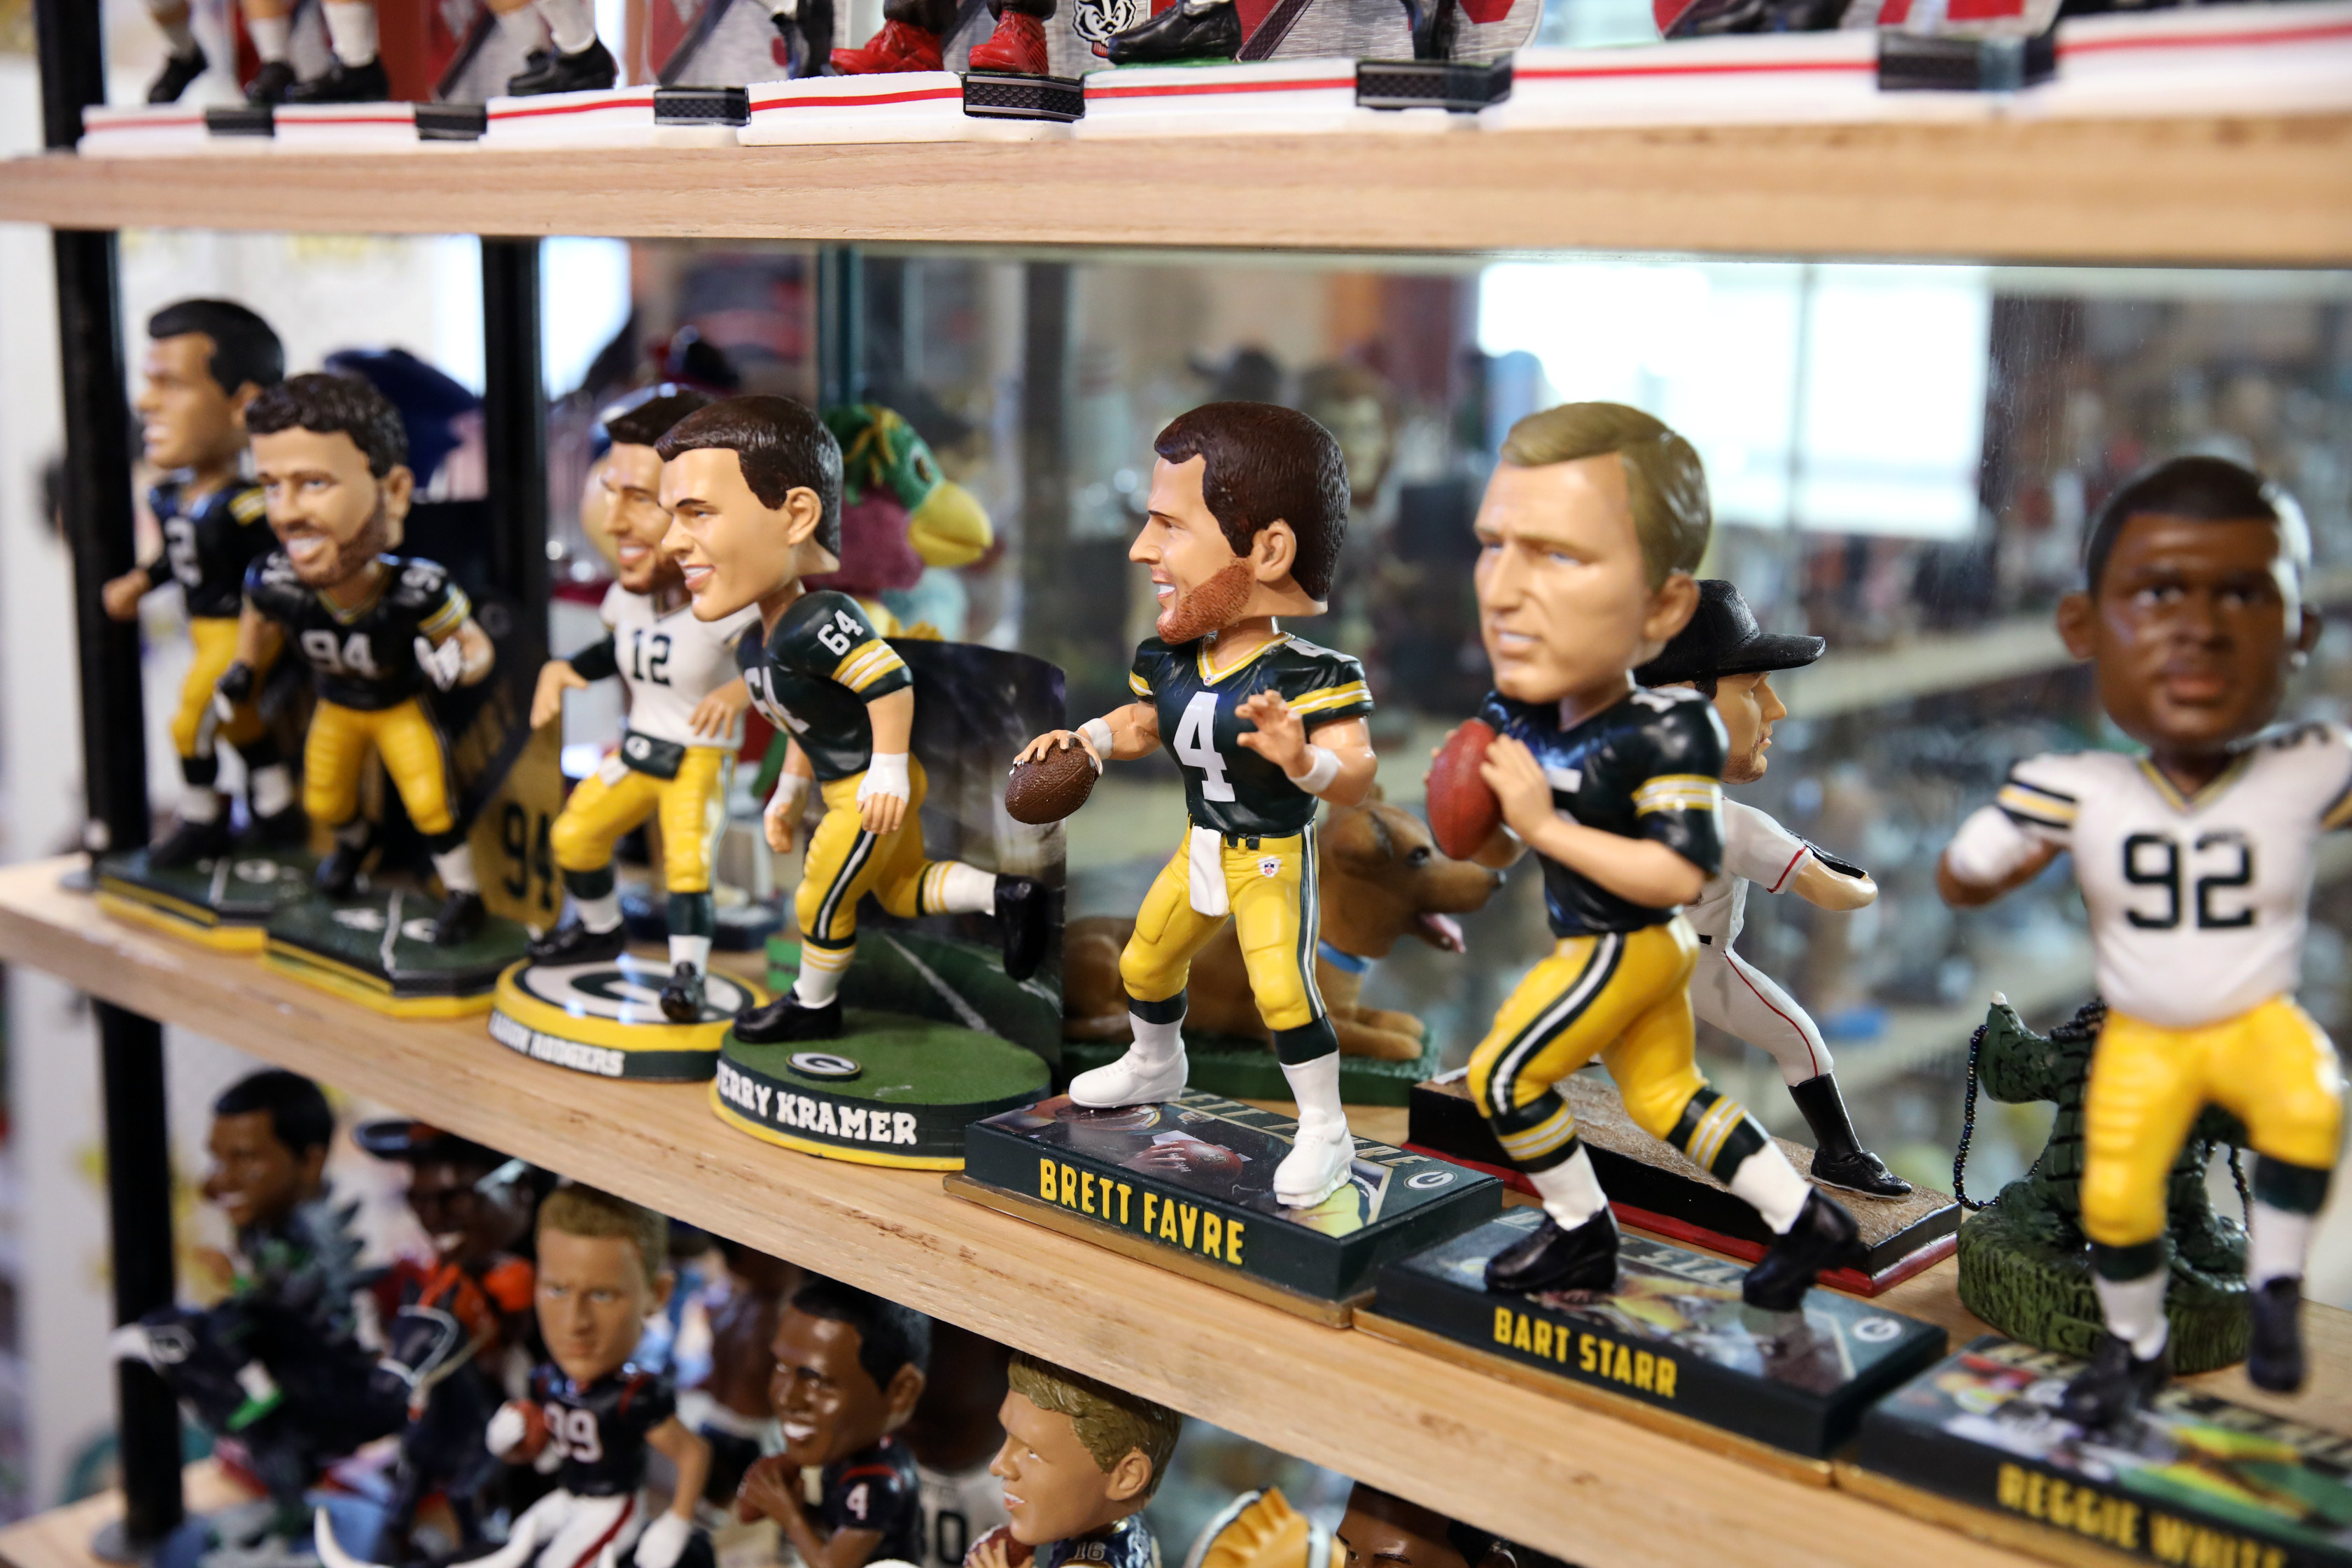 Where To See The World's Largest Collection of Bobbleheads